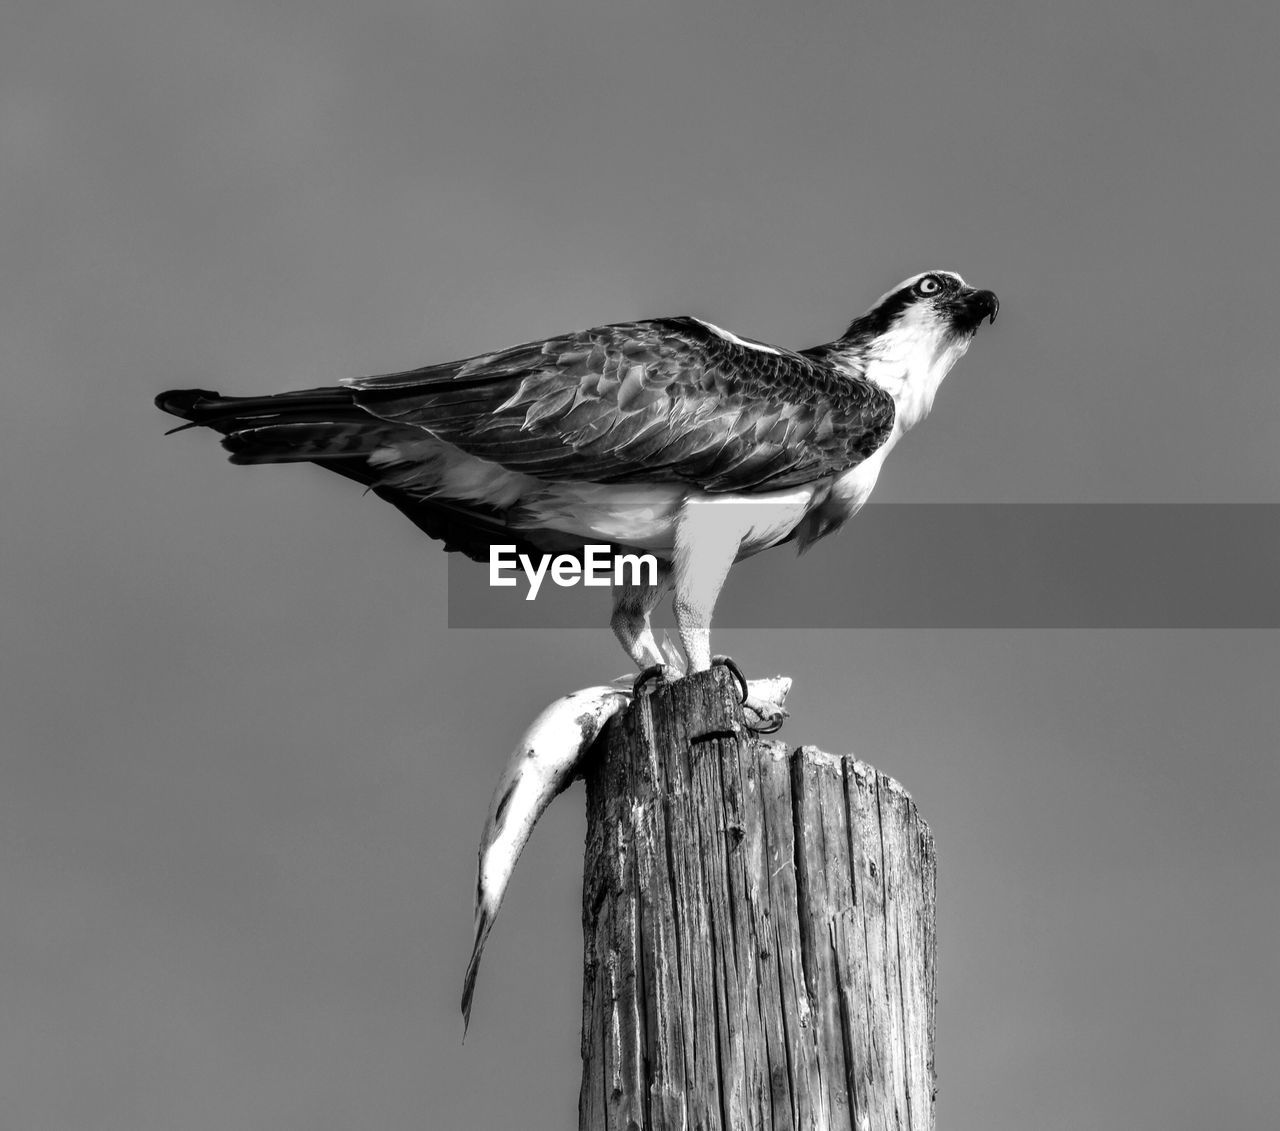 Owl perching on wooden post against clear sky